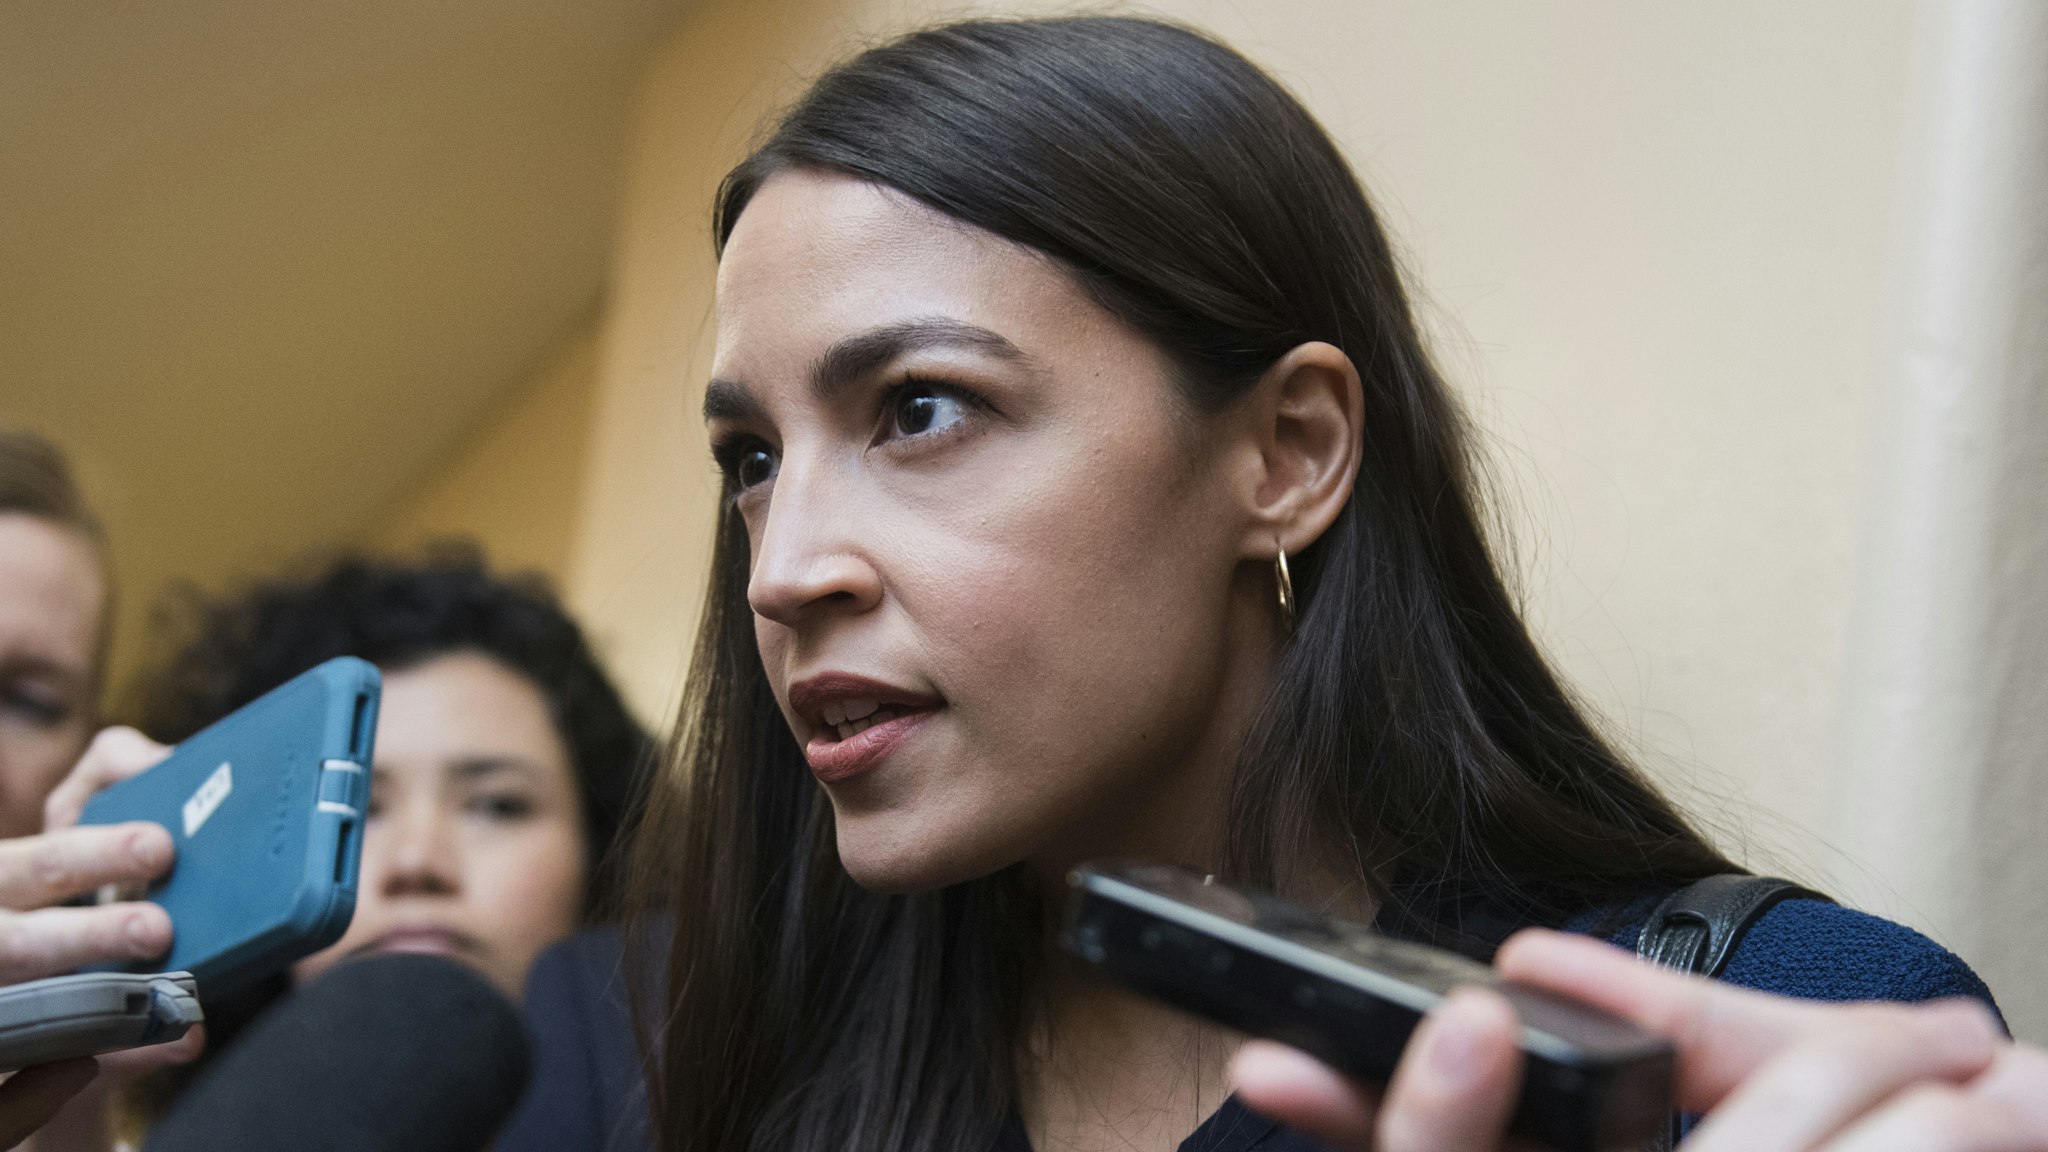 UNITED STATES - SEPTEMBER 10: Rep. Alexandria Ocasio-Cortez, D-N.Y., talks with reporters after a meeting of the House Democratic Caucus on Tuesday, September 10, 2019.